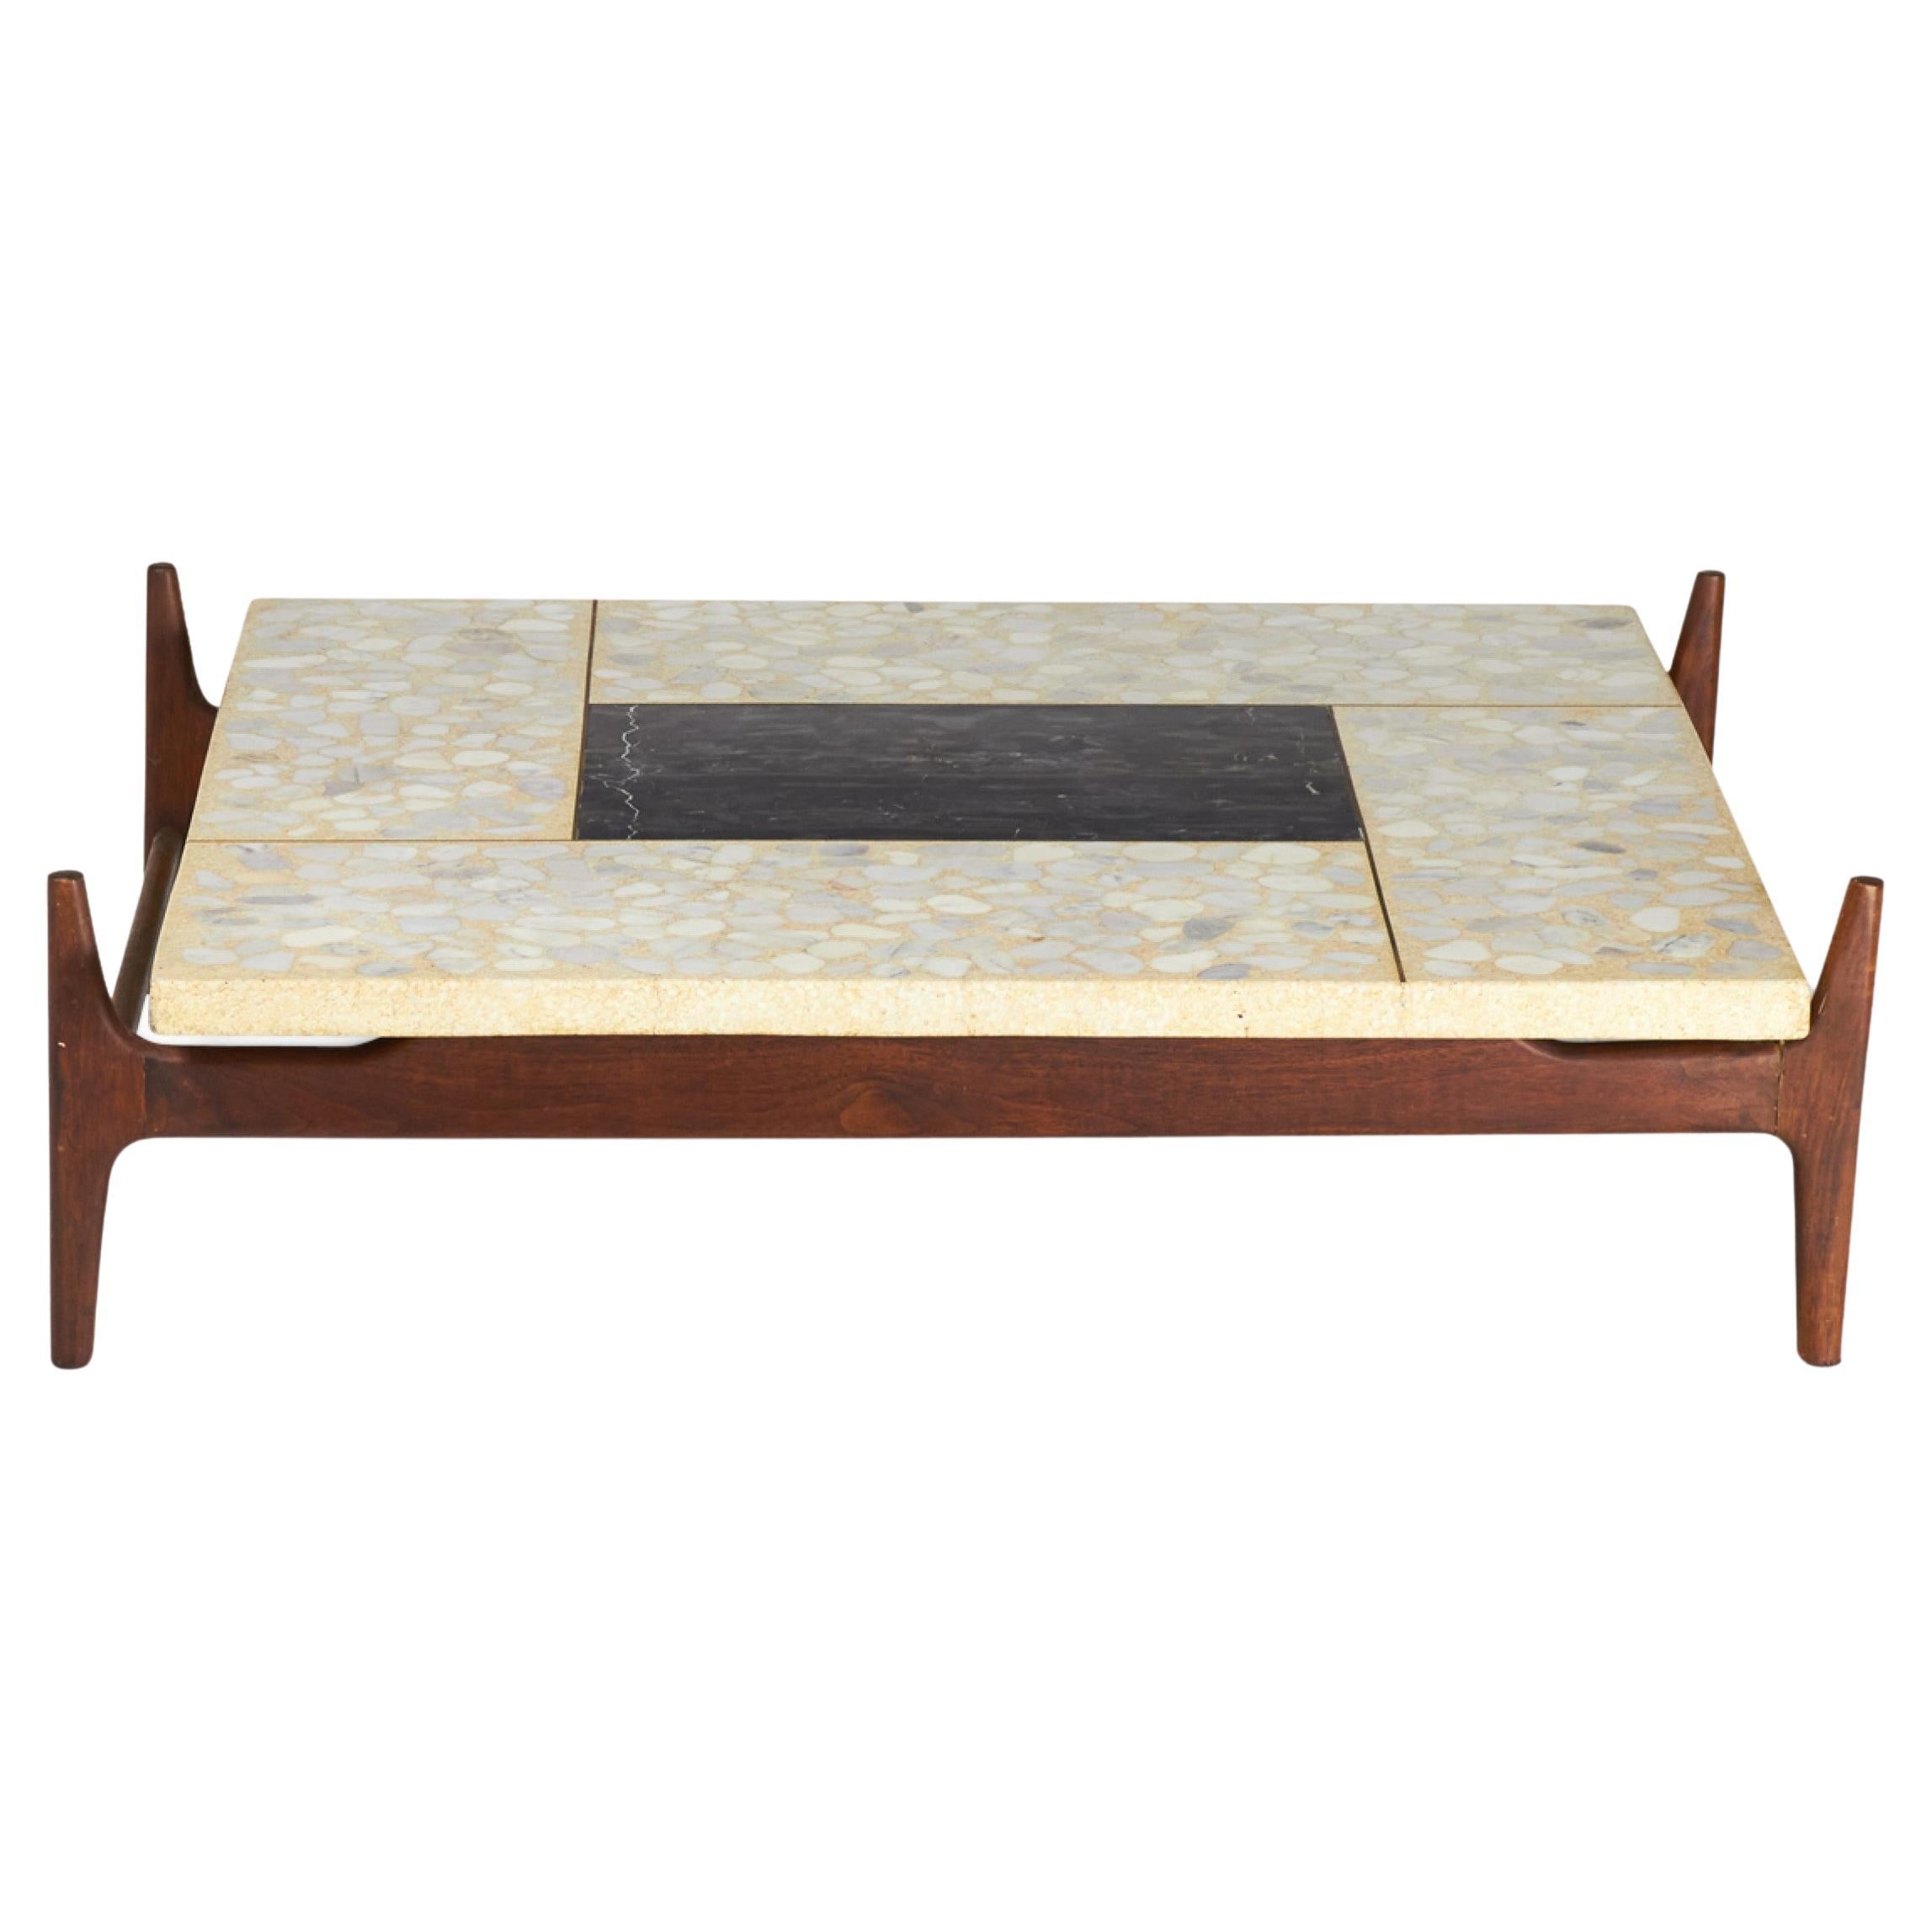 Adrian Pearsall for Craft Associates Terrazzo and Walnut Coffee Table